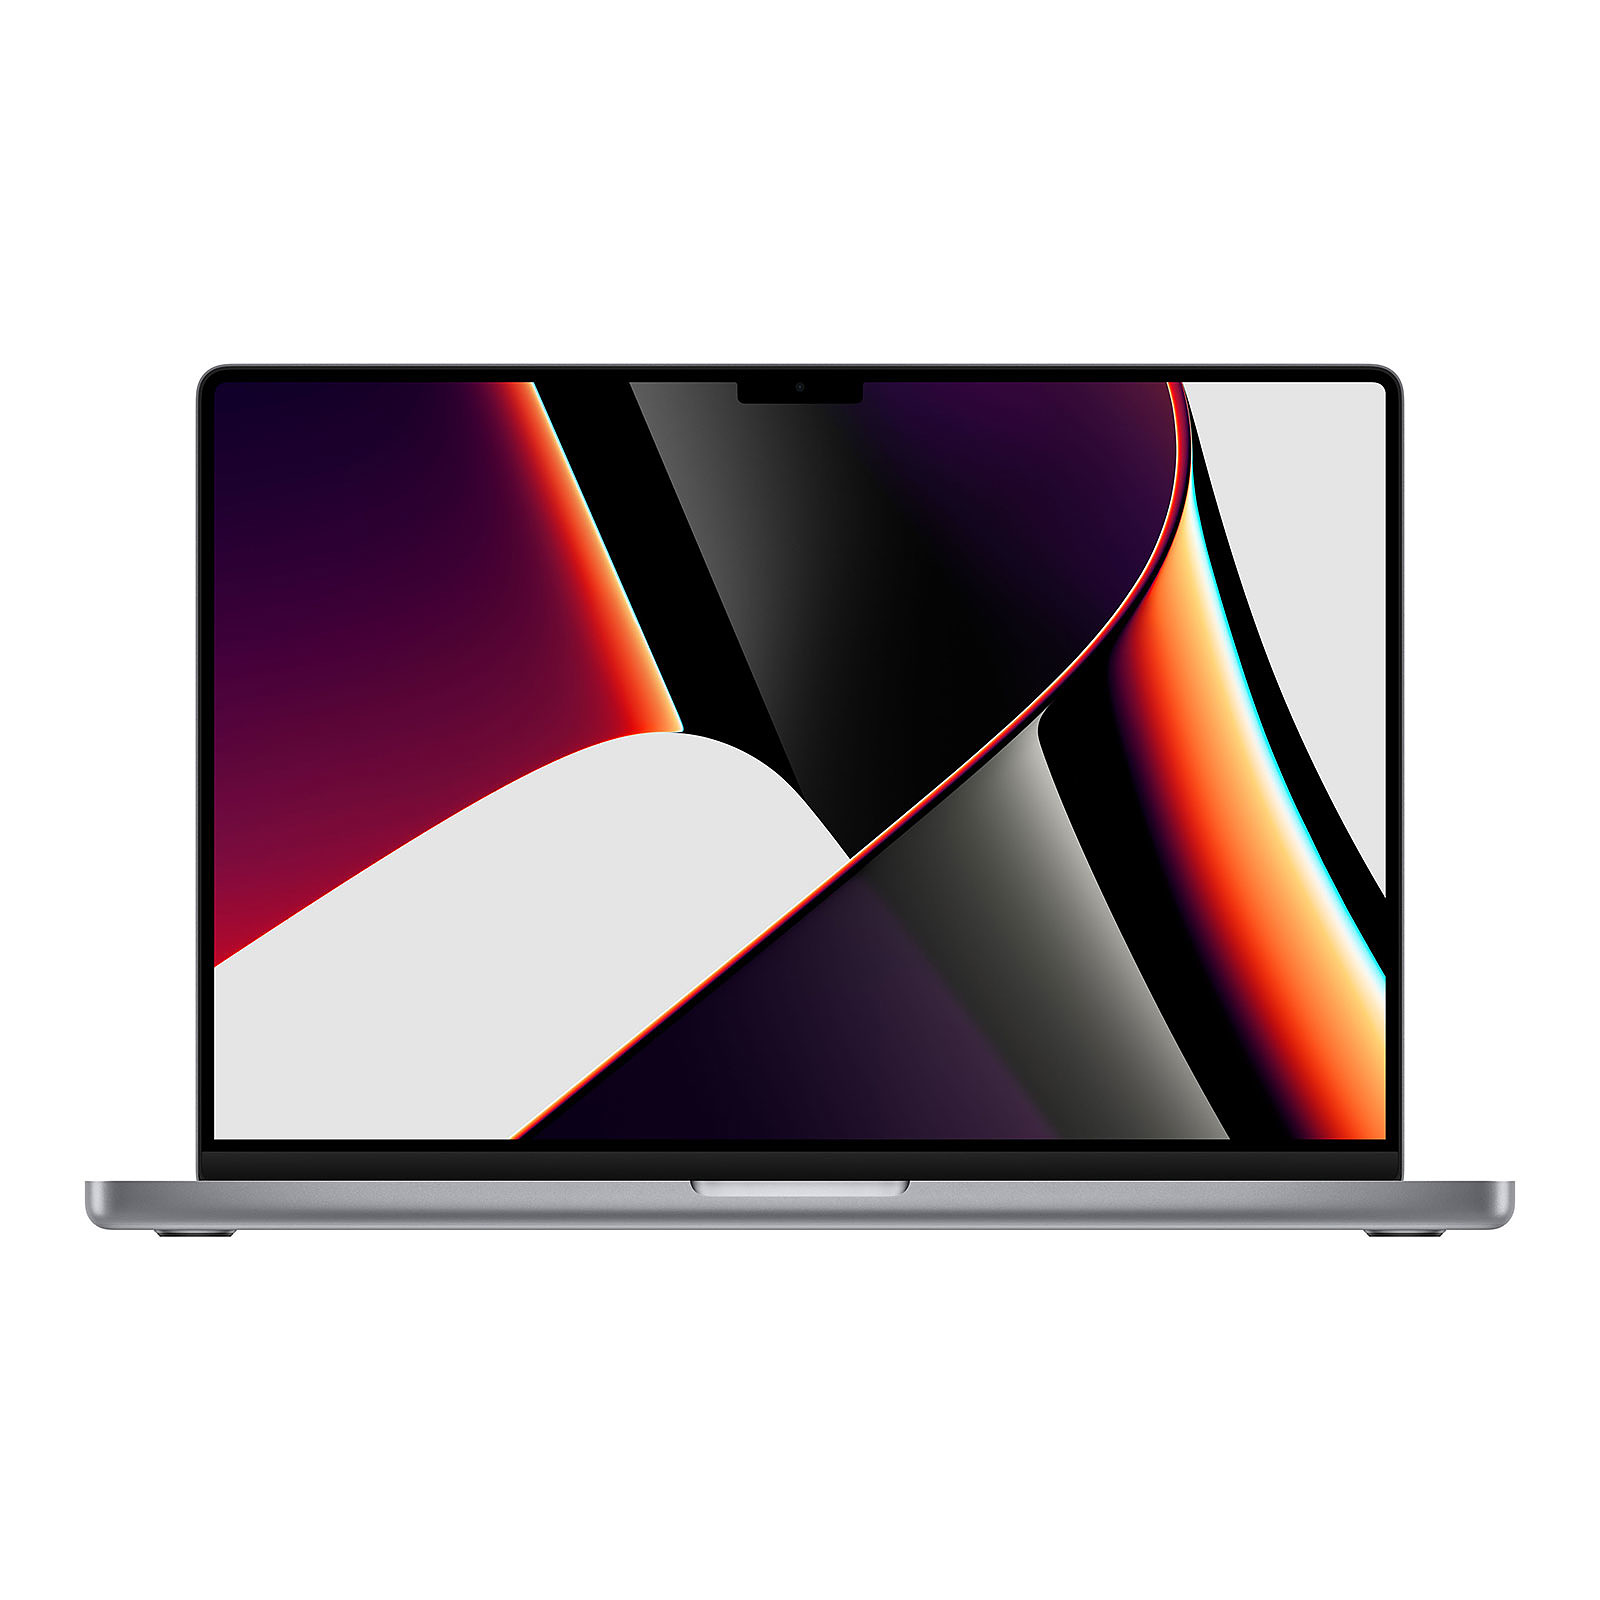 Apple MacBook Pro M1 Pro (2021) 16" Gris sideral 32Go/1To (MK193FN/A-32GB-QWERTY-UK) - MacBook Apple